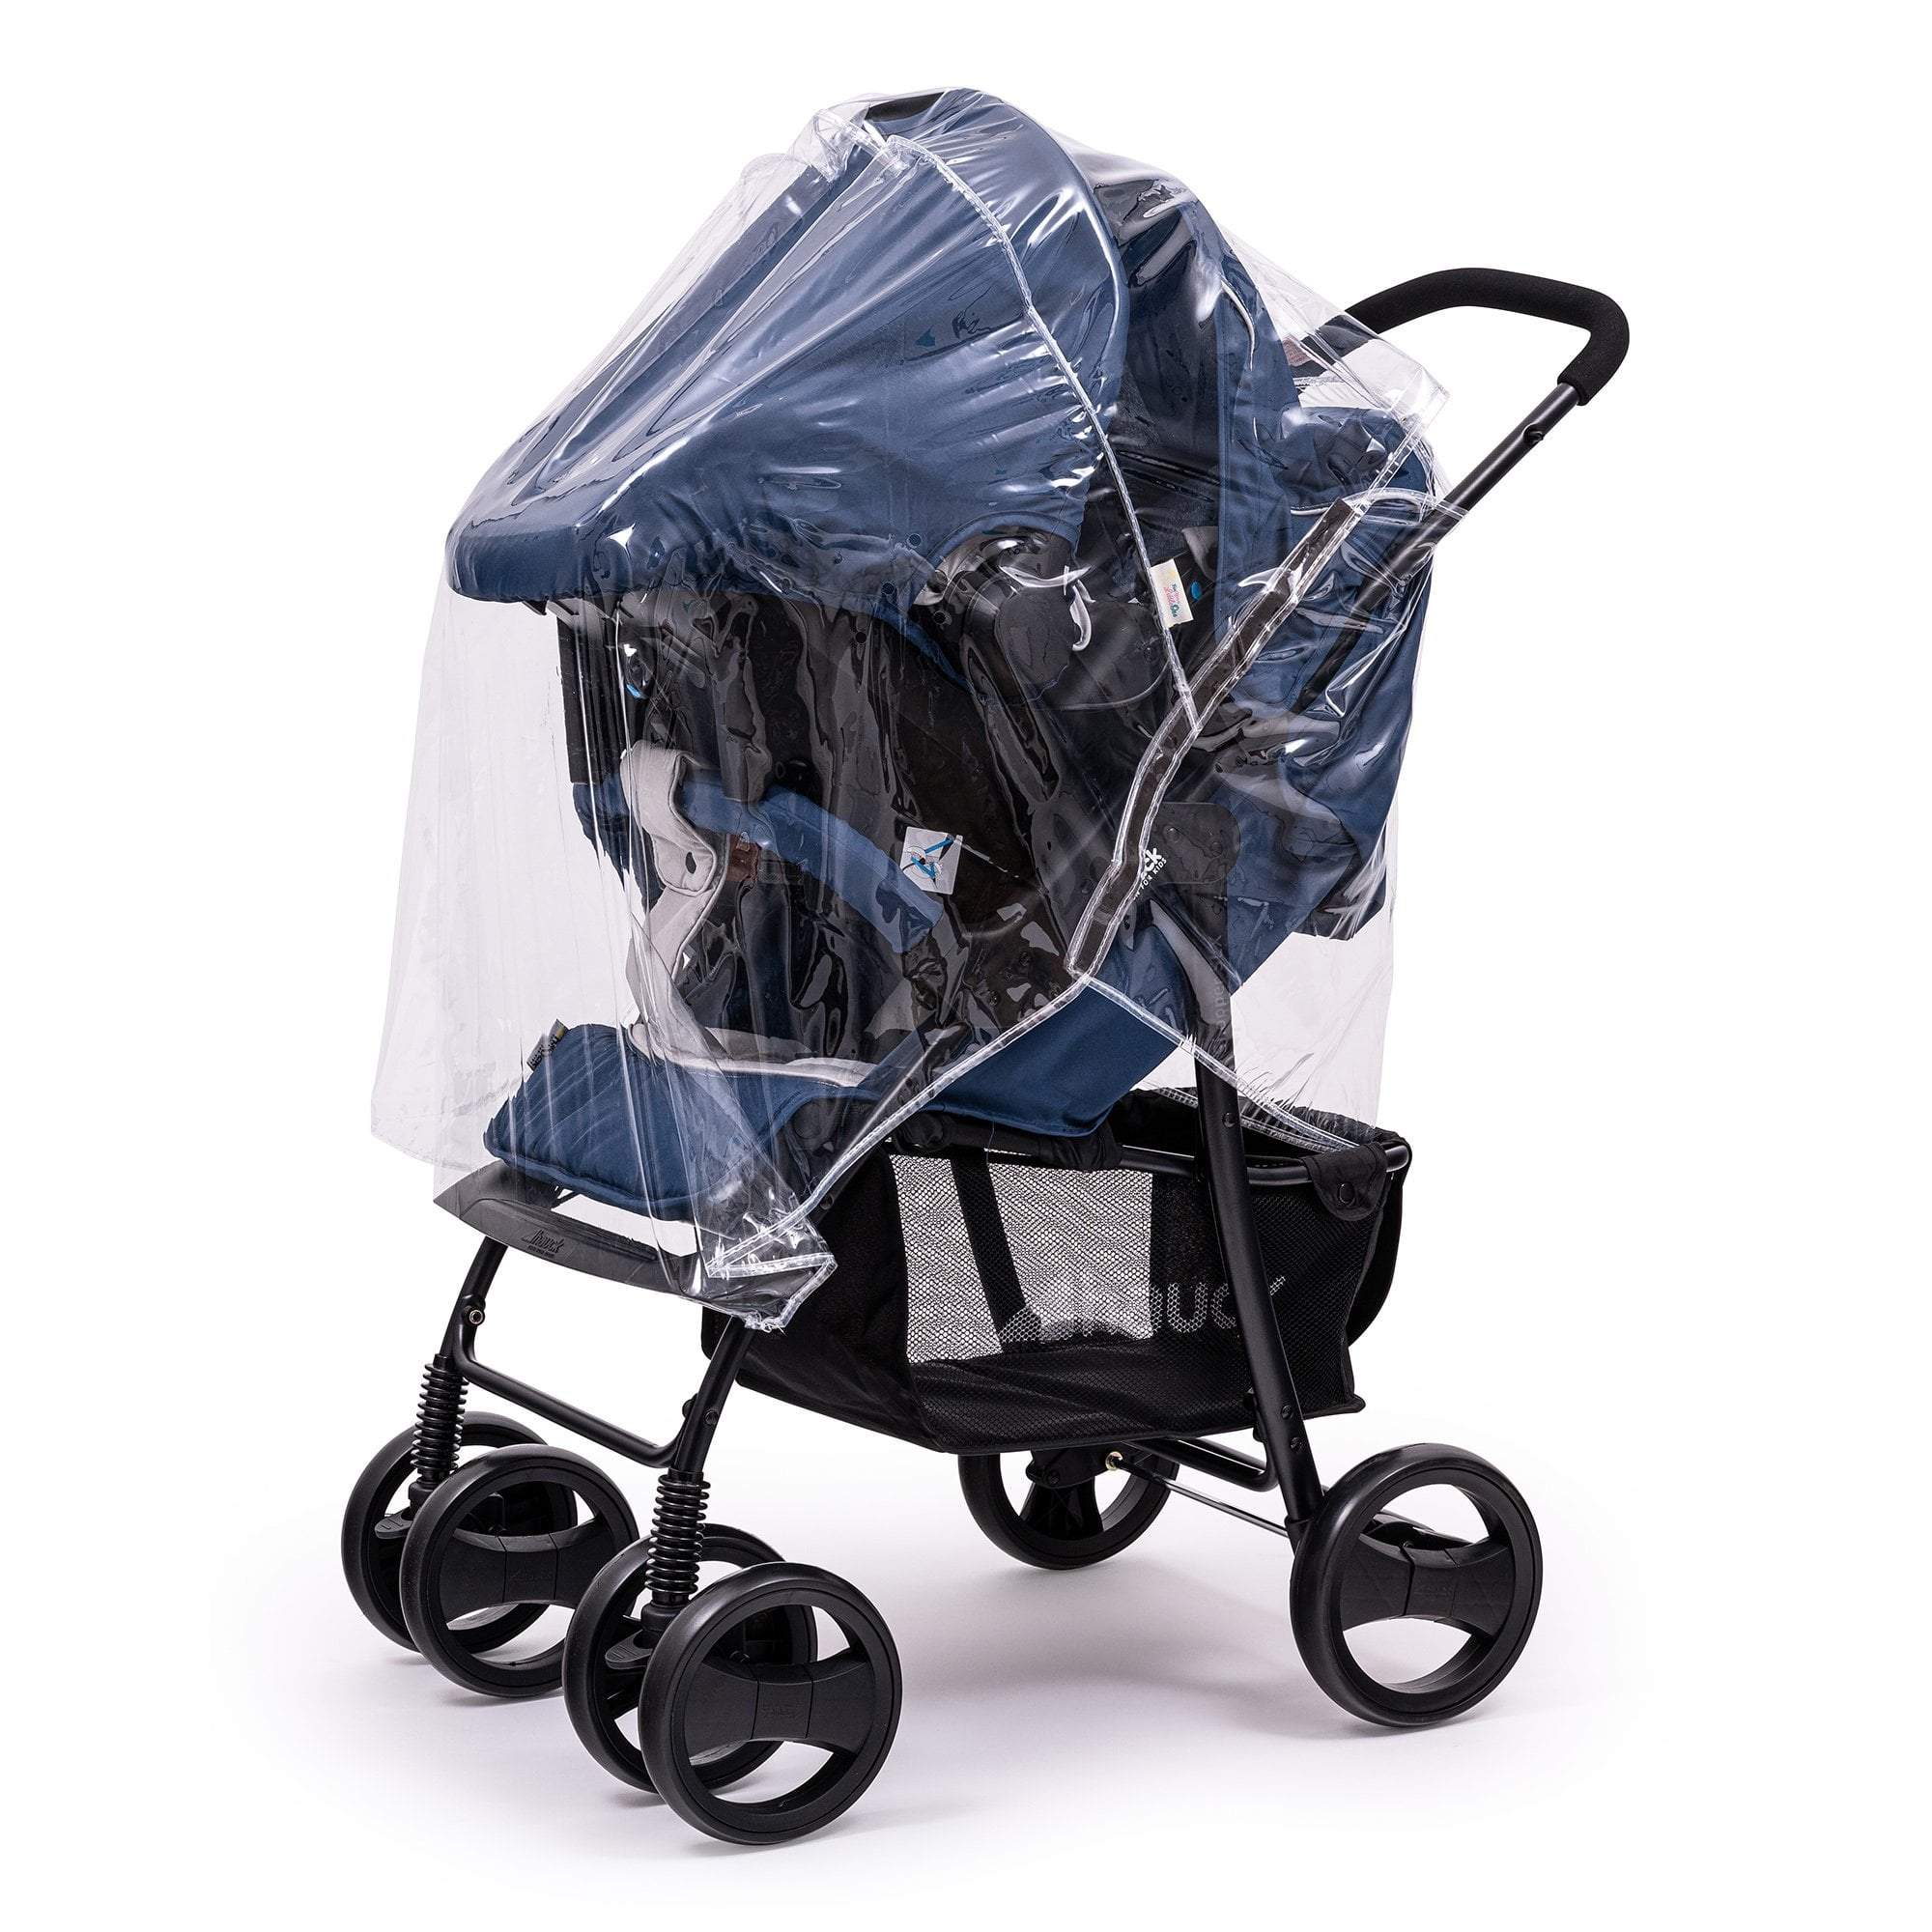 Travel System Raincover Compatible with BabiesRus - Fits All Models - For Your Little One